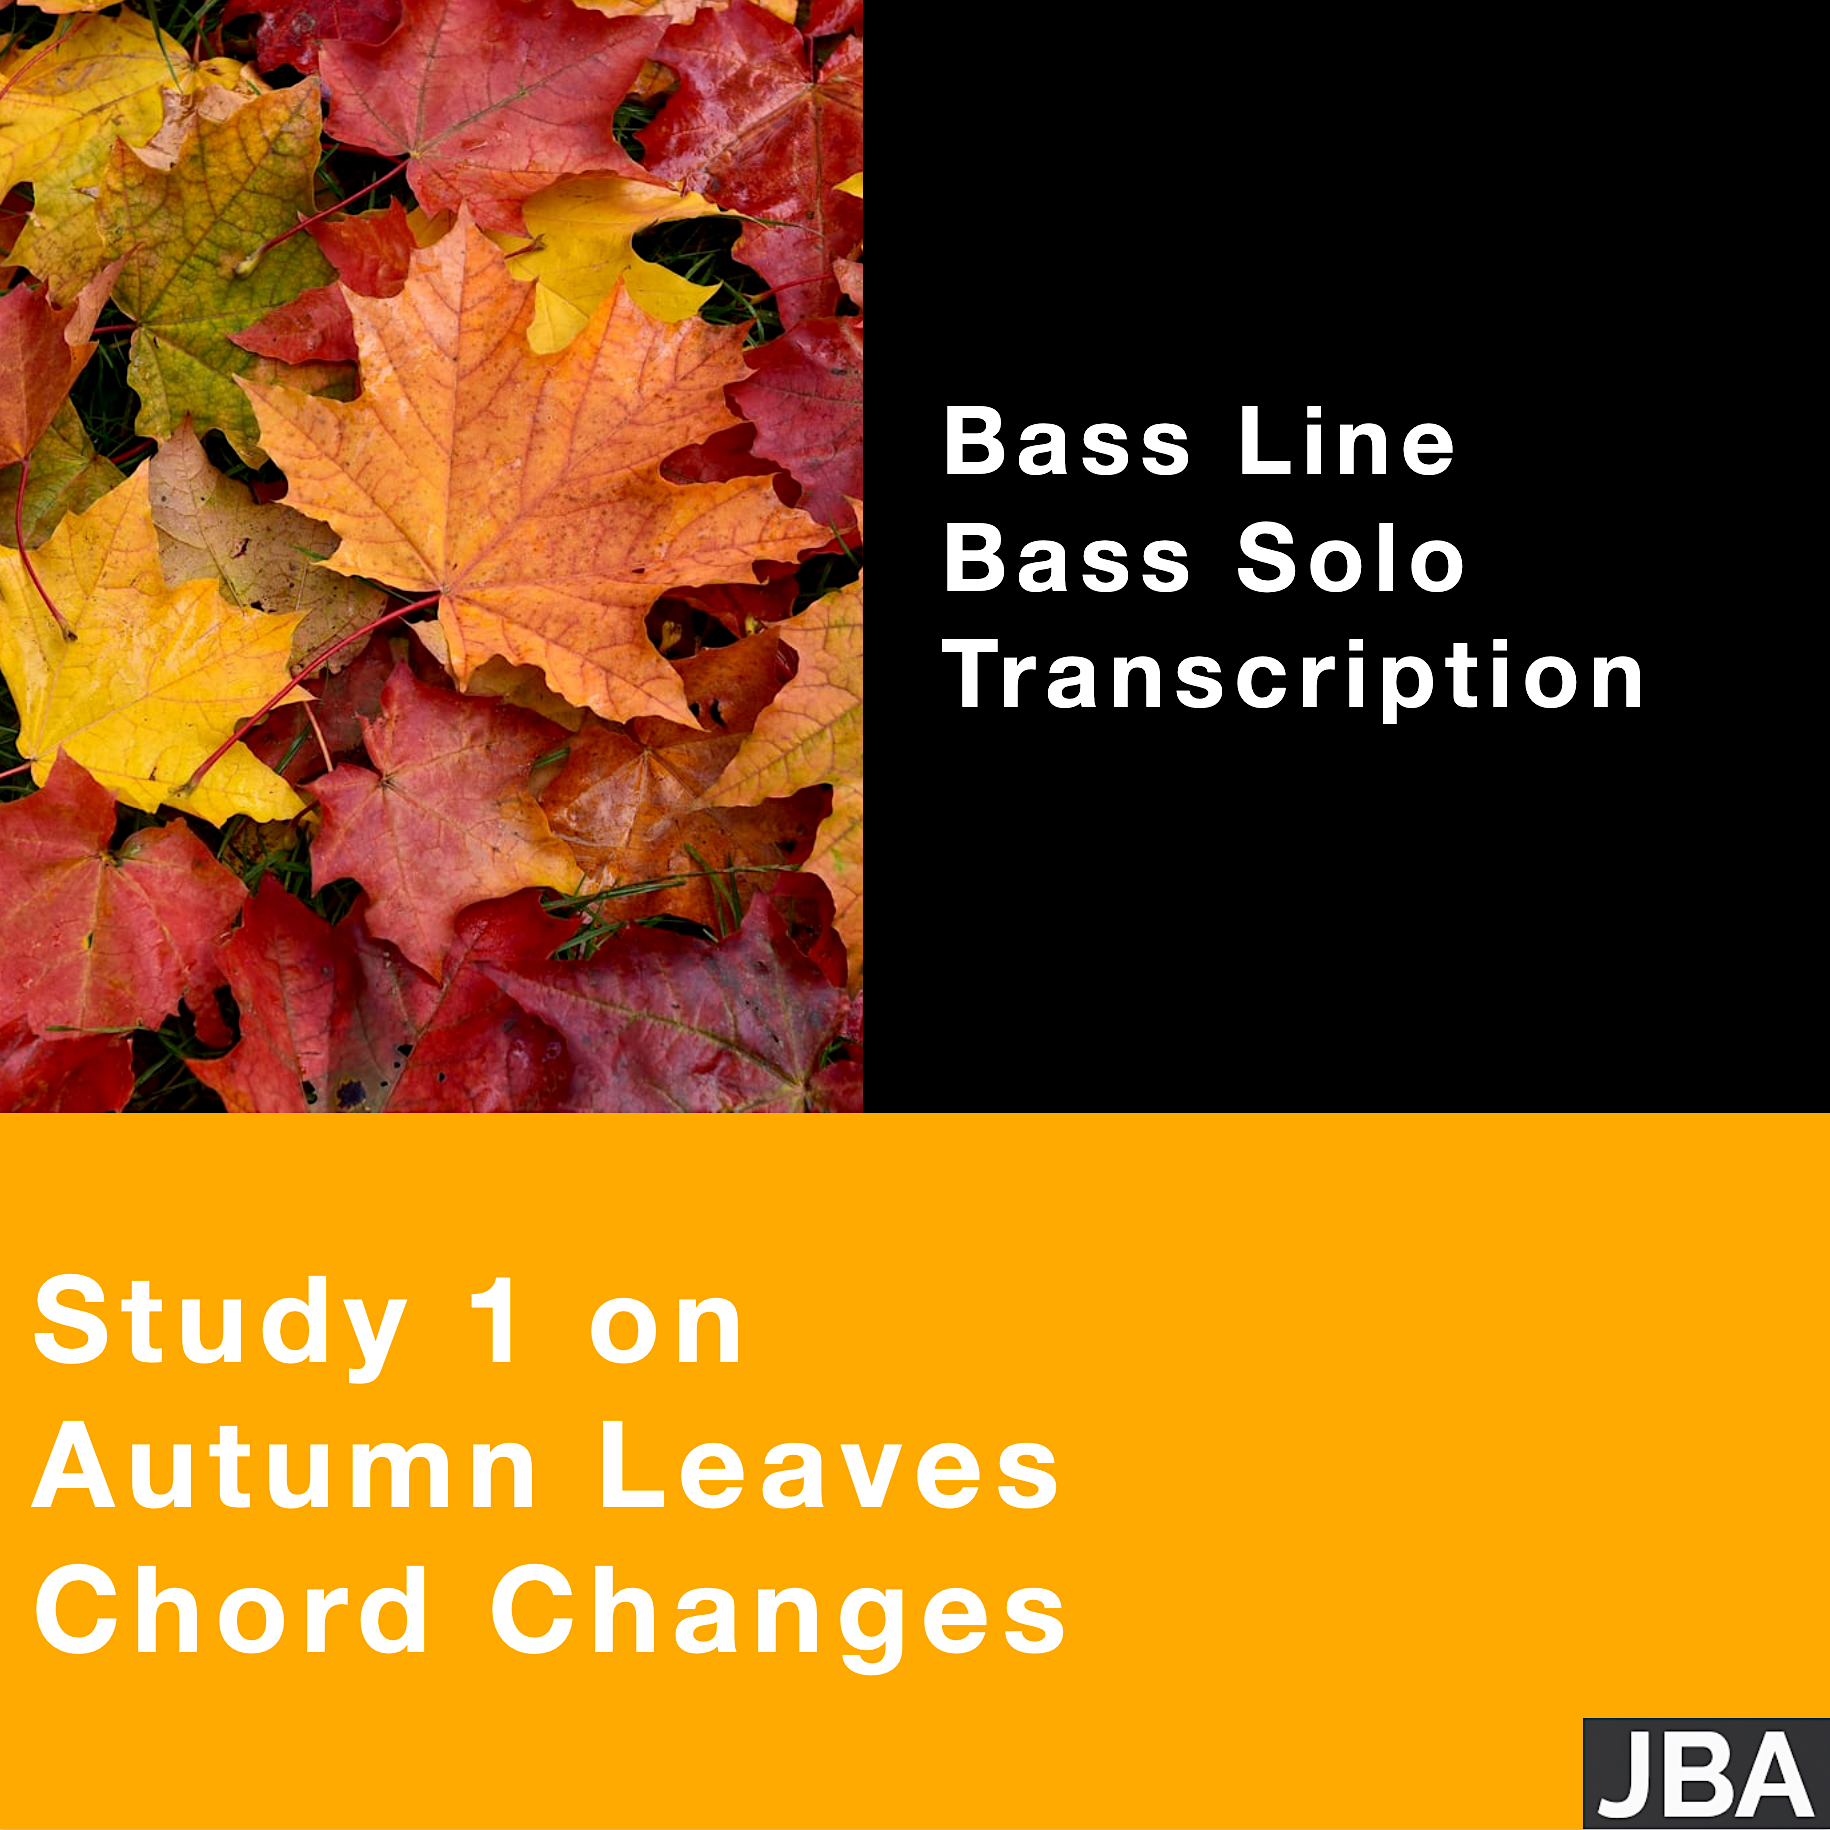 Study  1 on Autumn Leaves chord changes